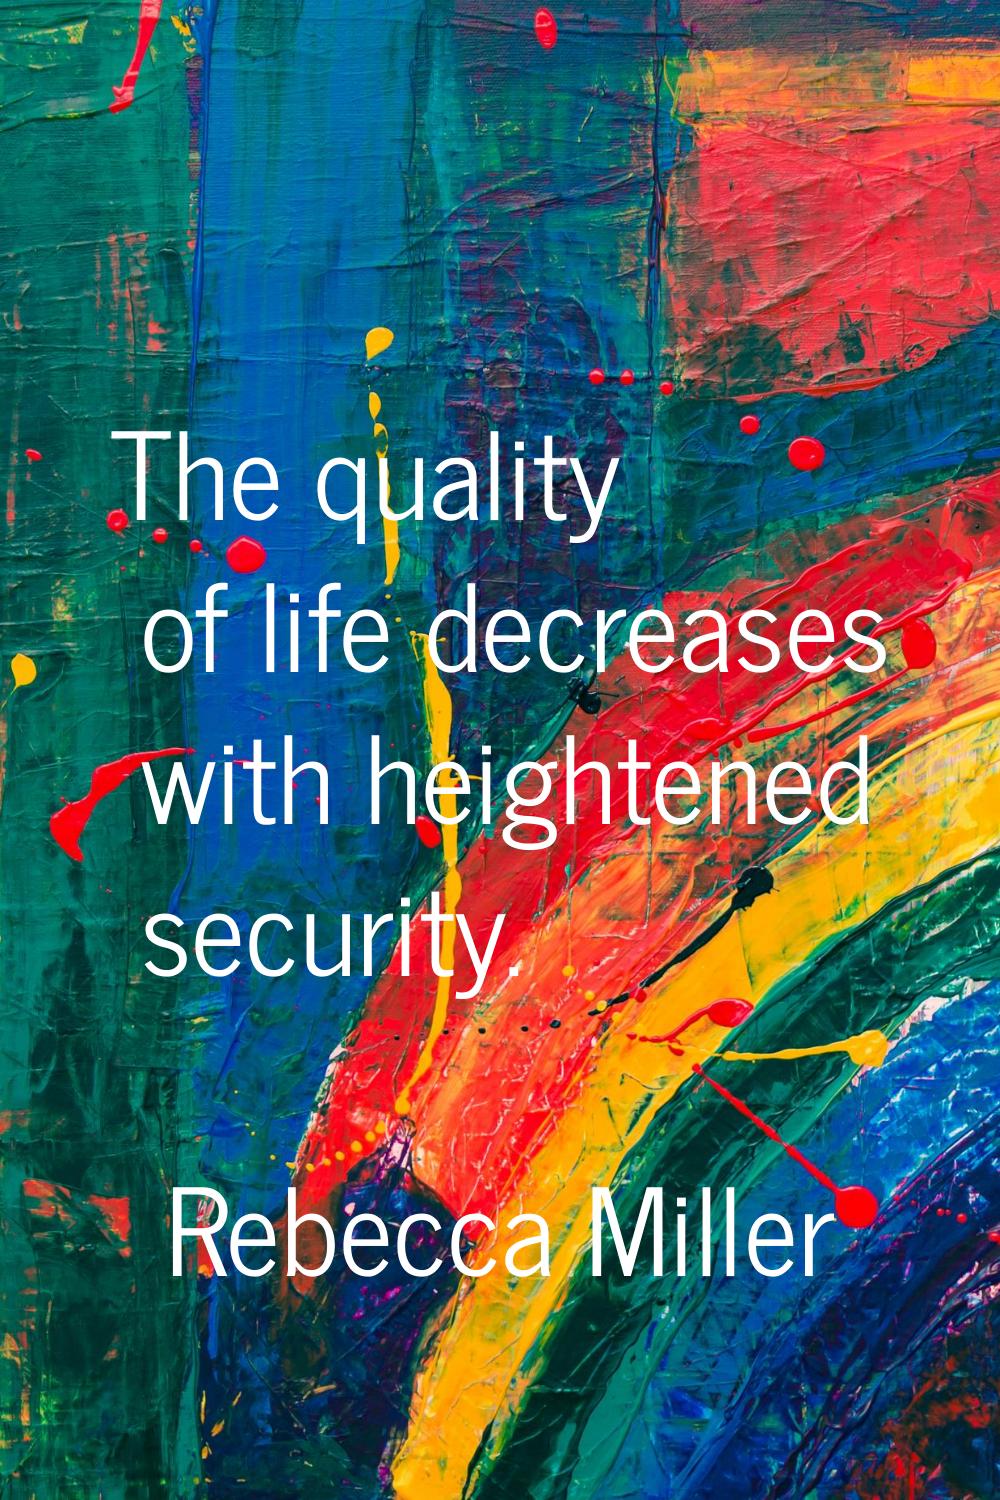 The quality of life decreases with heightened security.